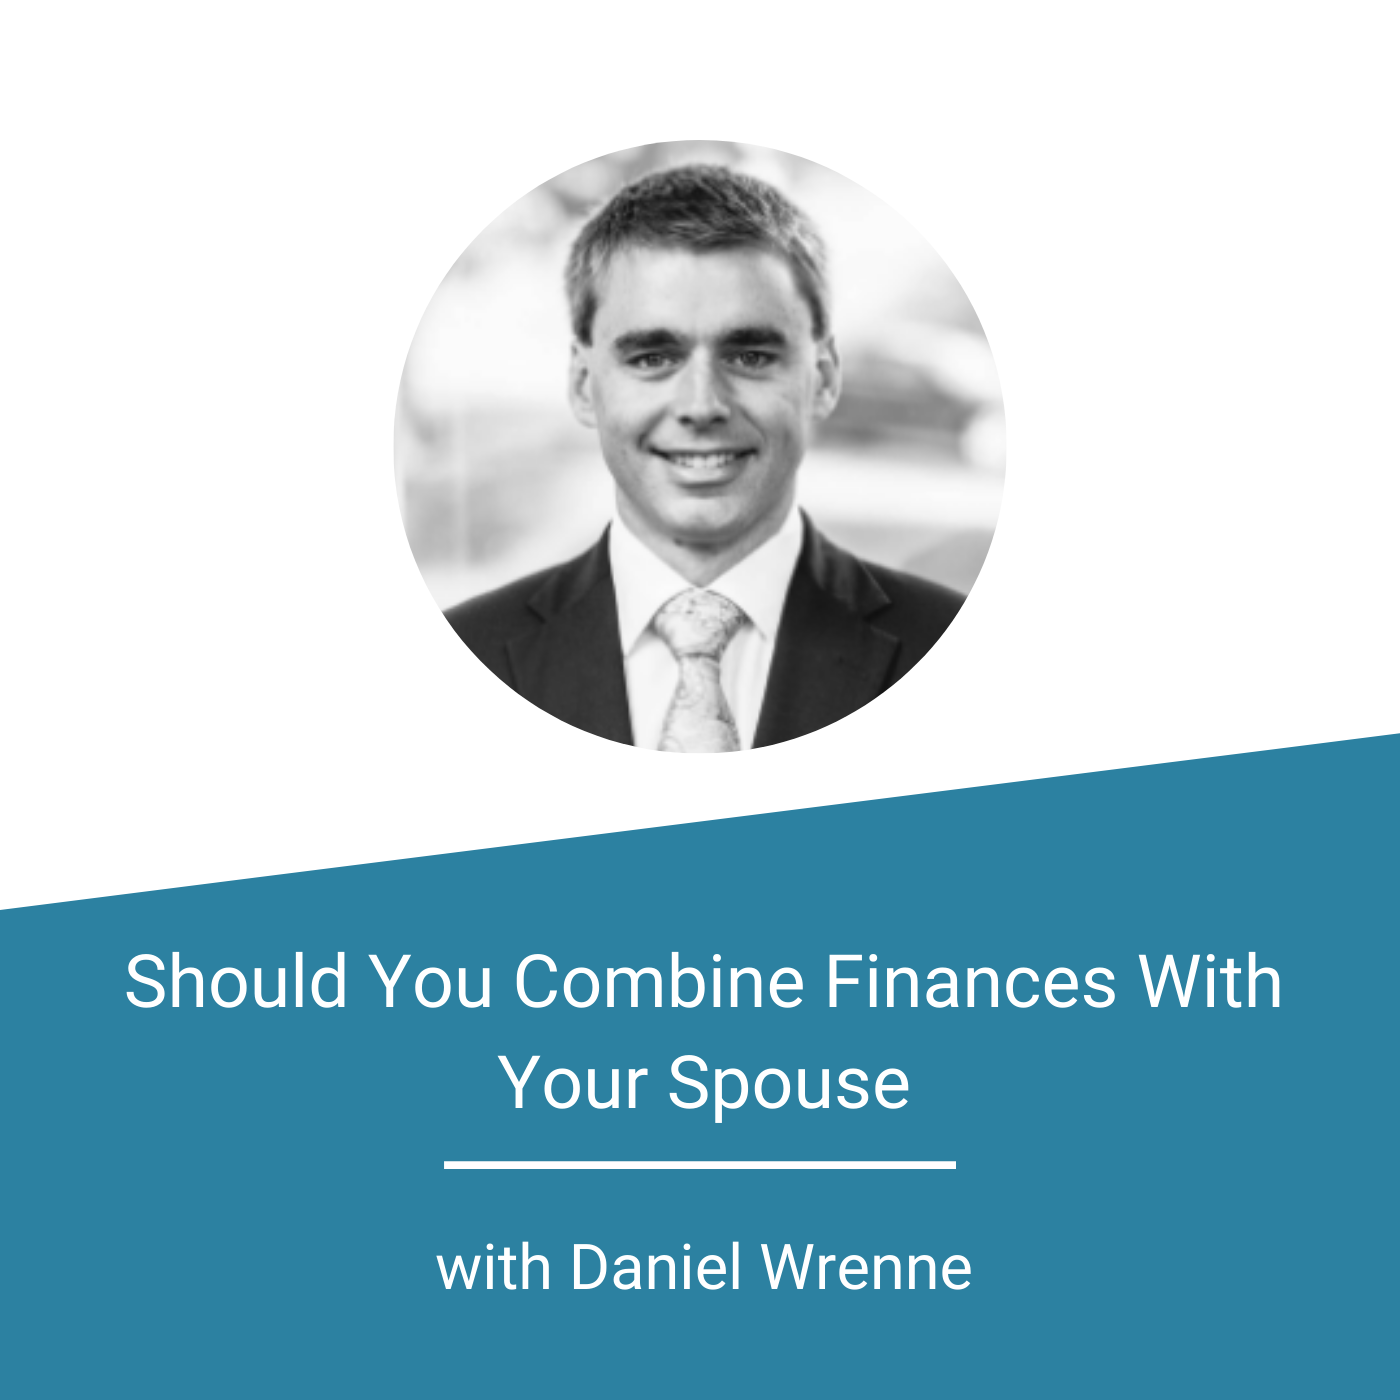 Featured Image - Should You Combine Finances With Your Spouse